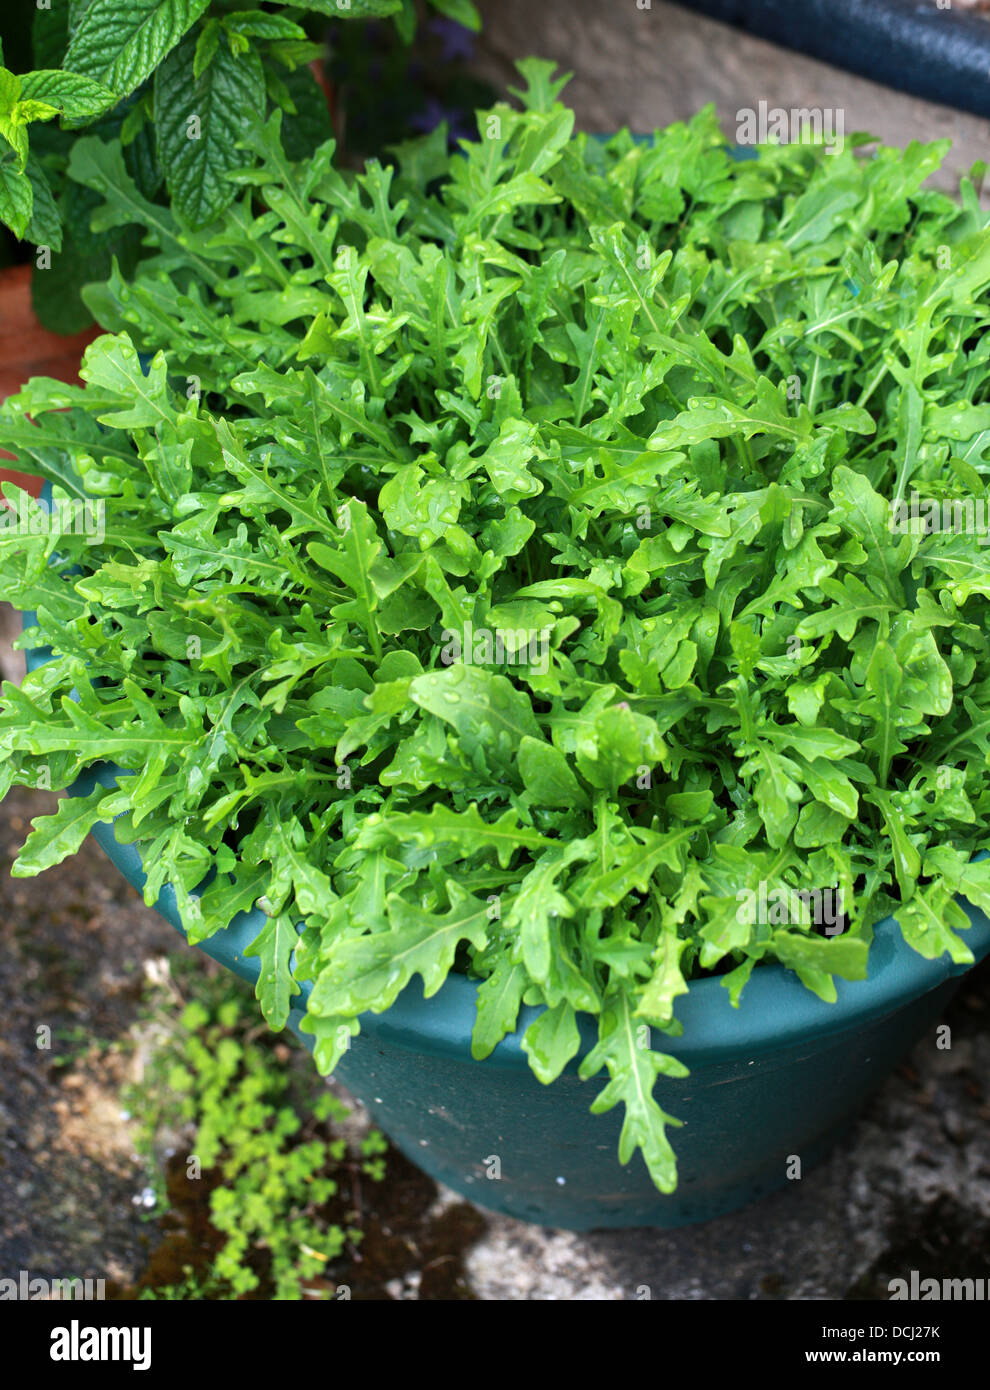 Young Shoots of Wild Rocket Growing in a Garden Tub. Aka. Perennial Wall Rocket, Sand Rocket, Lincoln's Weed, White Rocket. Stock Photo